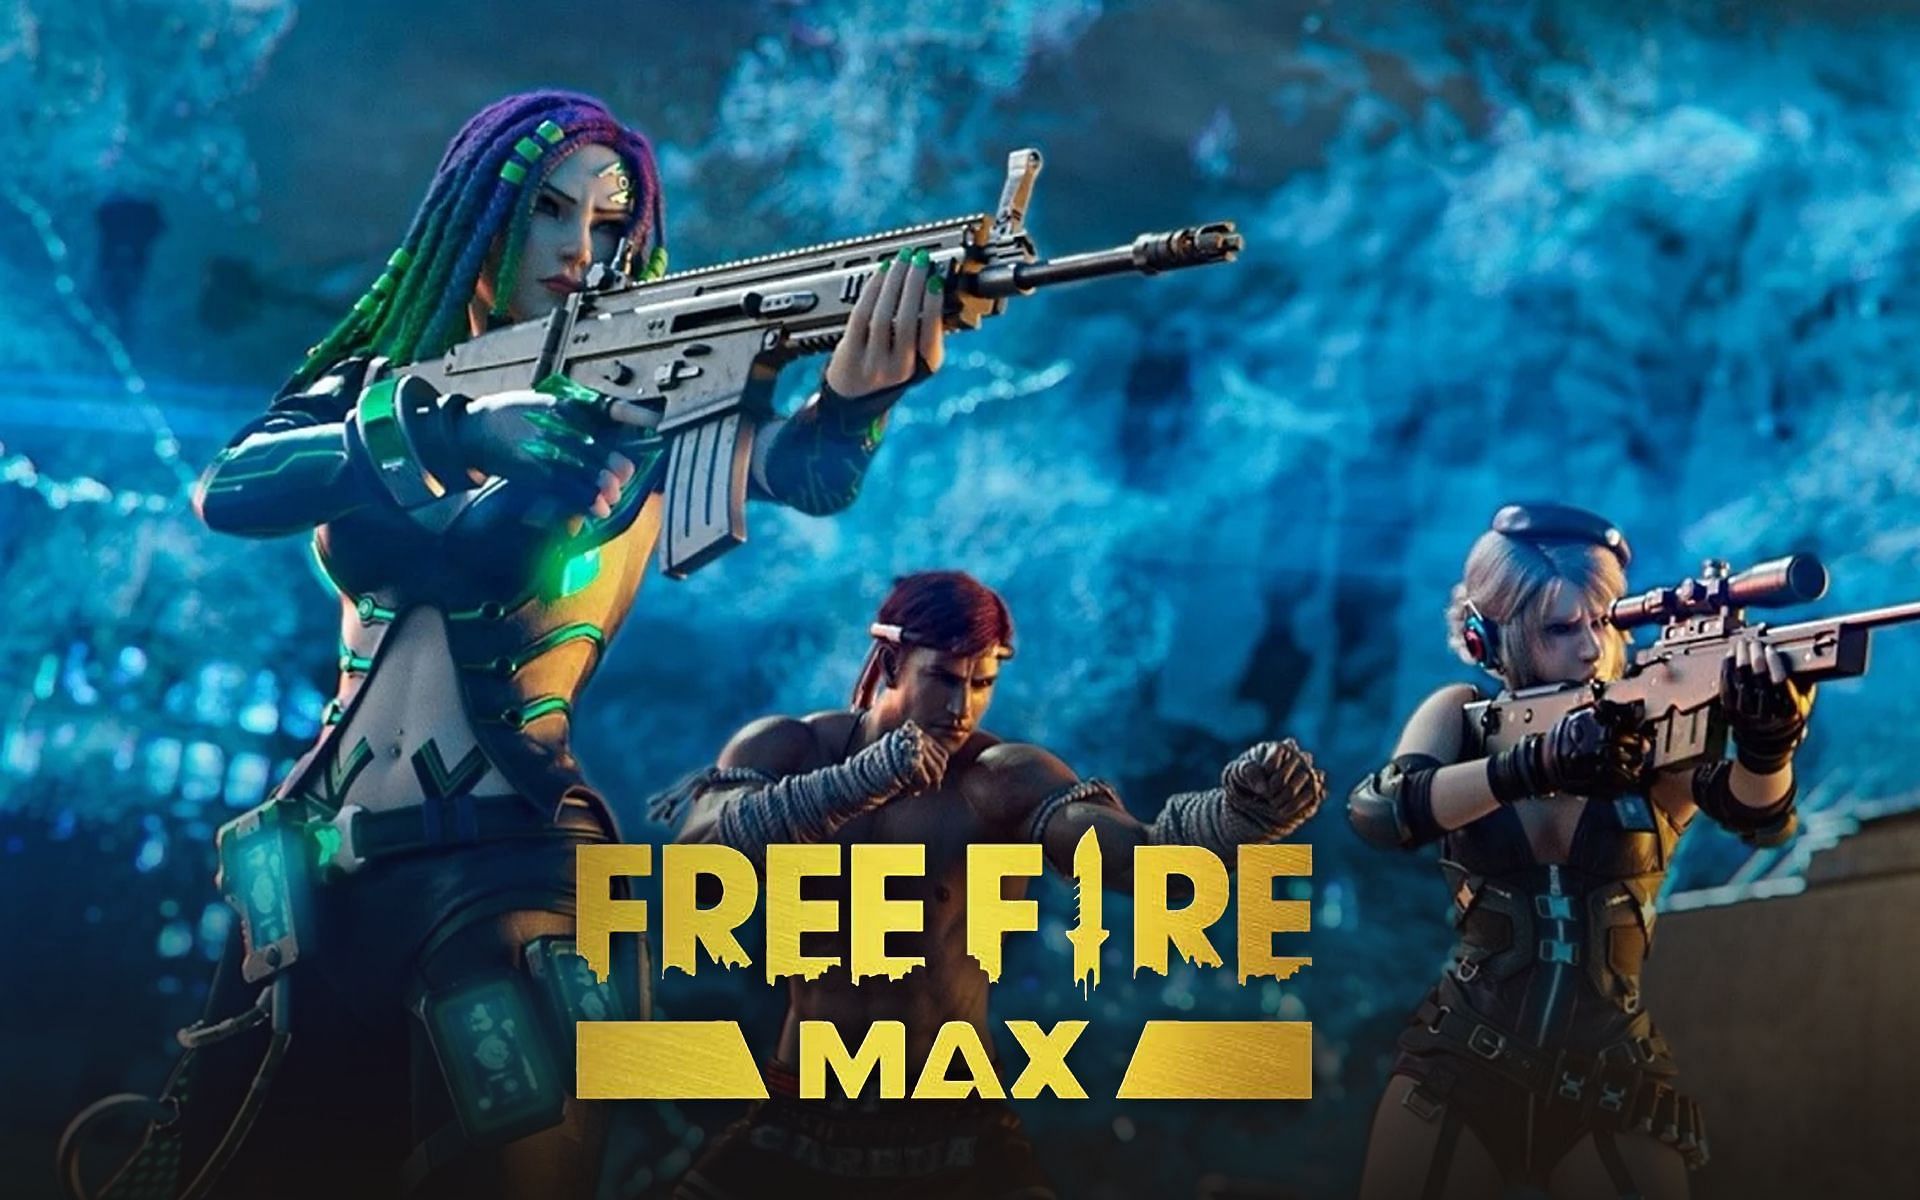 How to get Free Fire MAX diamonds for free in Indian server (OB34)